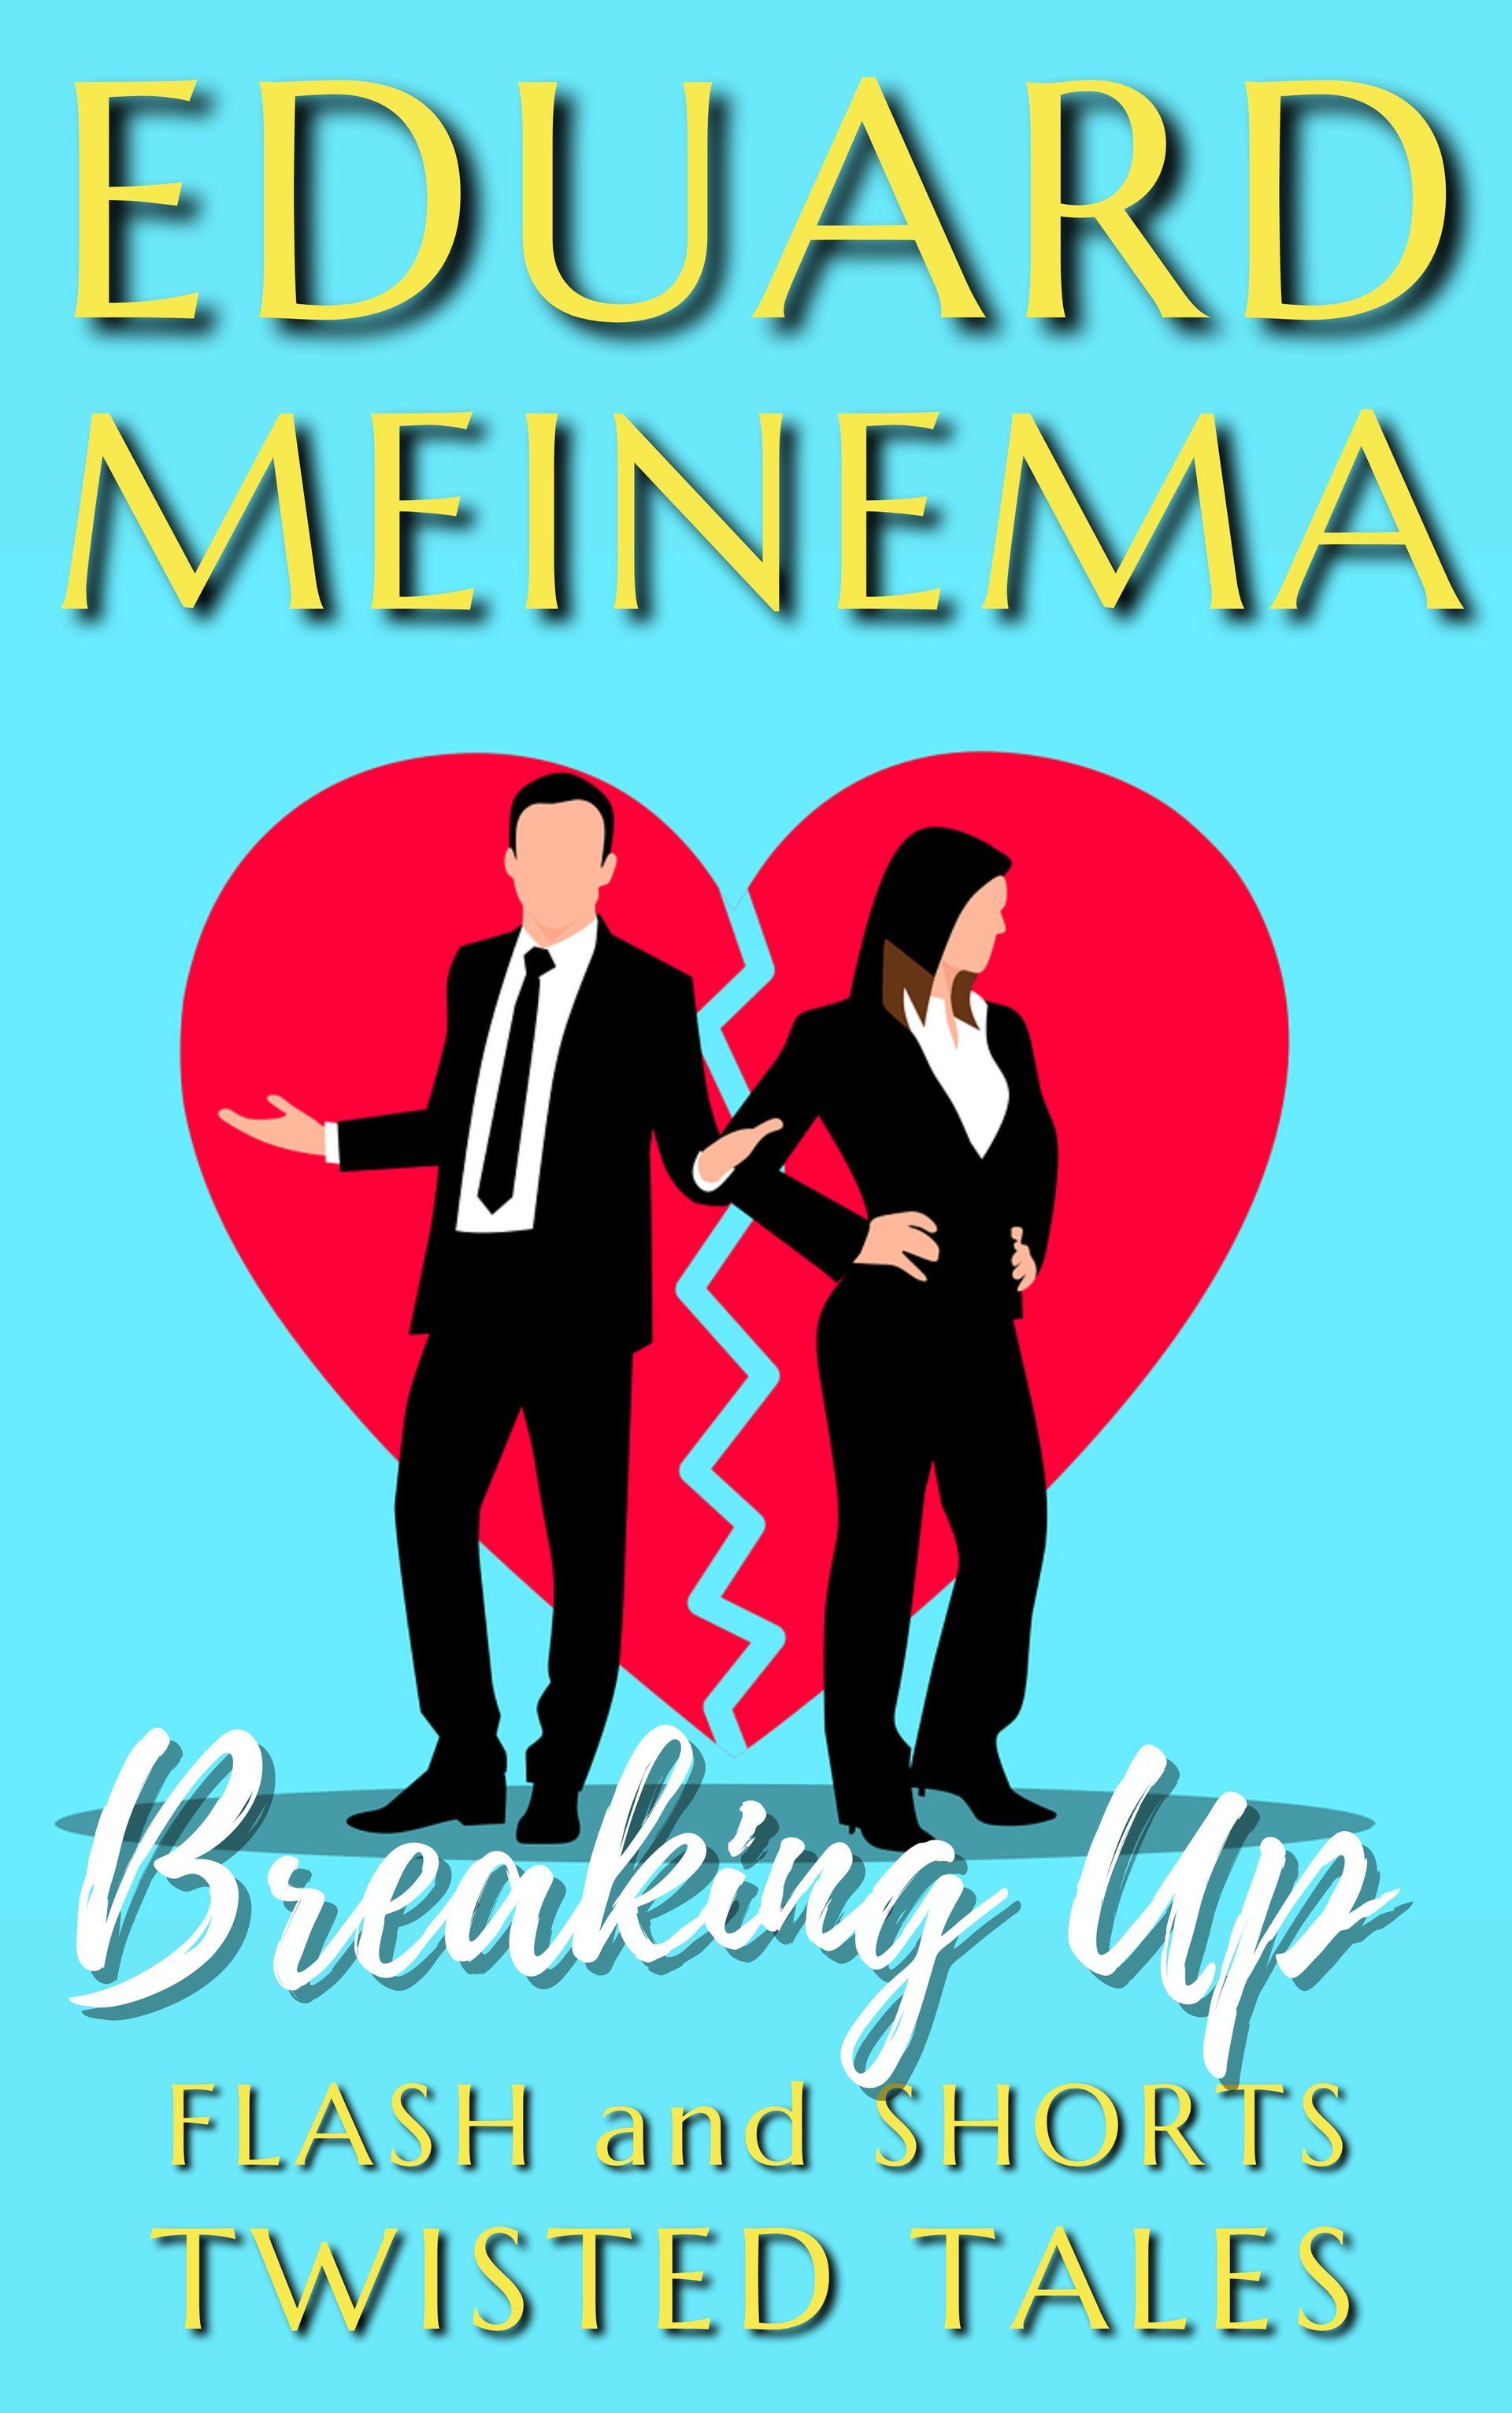 Breaking Up,  a short feelgood story by Eduard Meinema